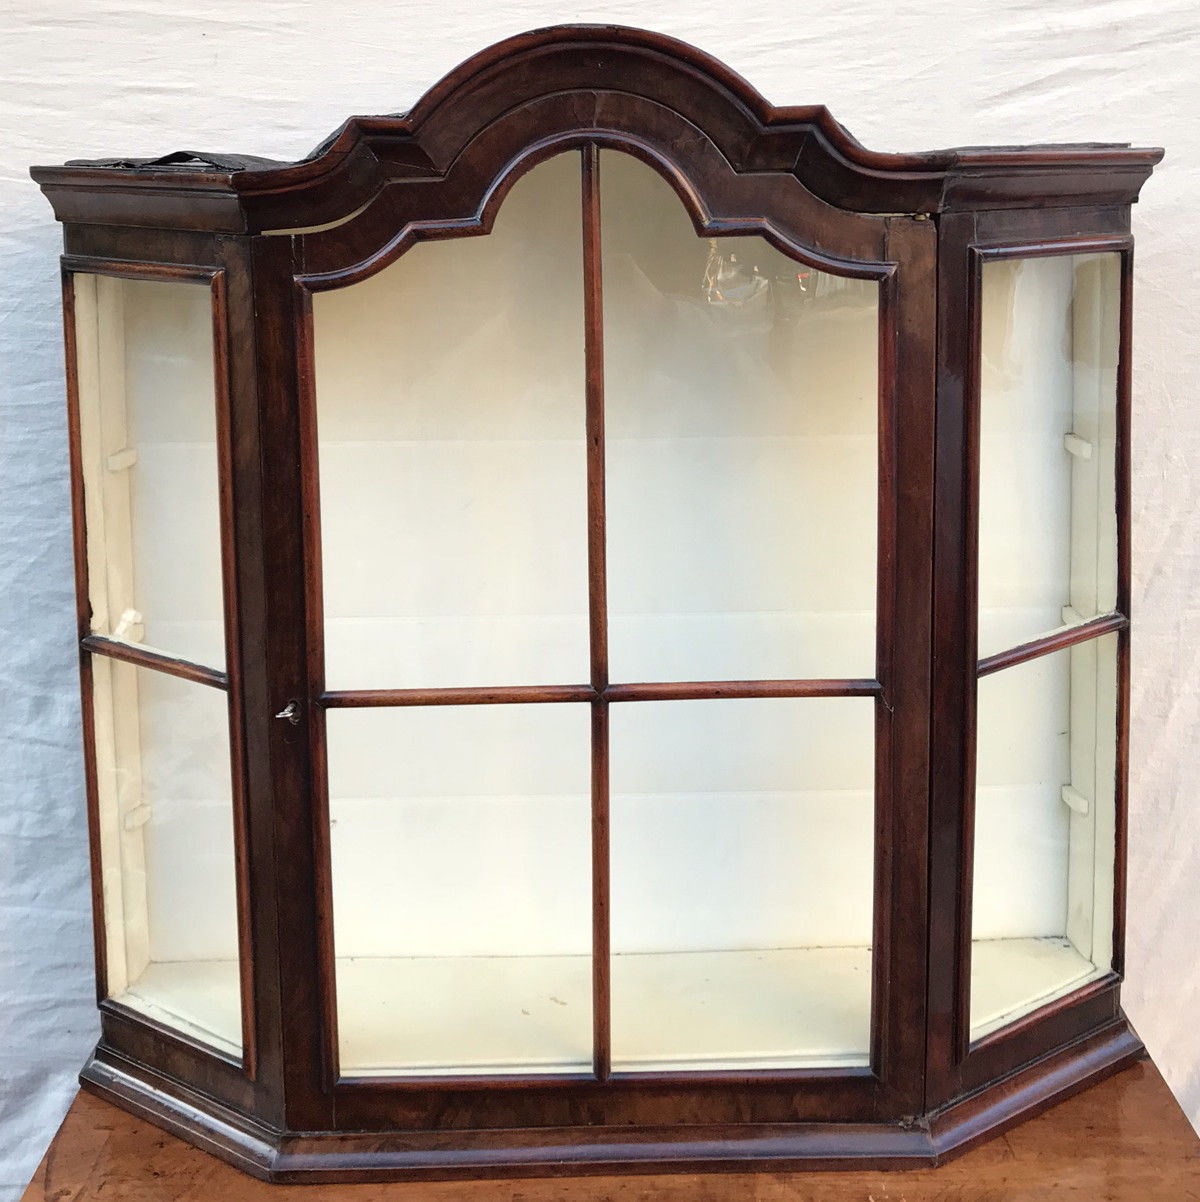 18TH CENTURY WILLIAM & MARY PERIOD WALL CABINET VITRINE W/TOMBSTONE BONNET